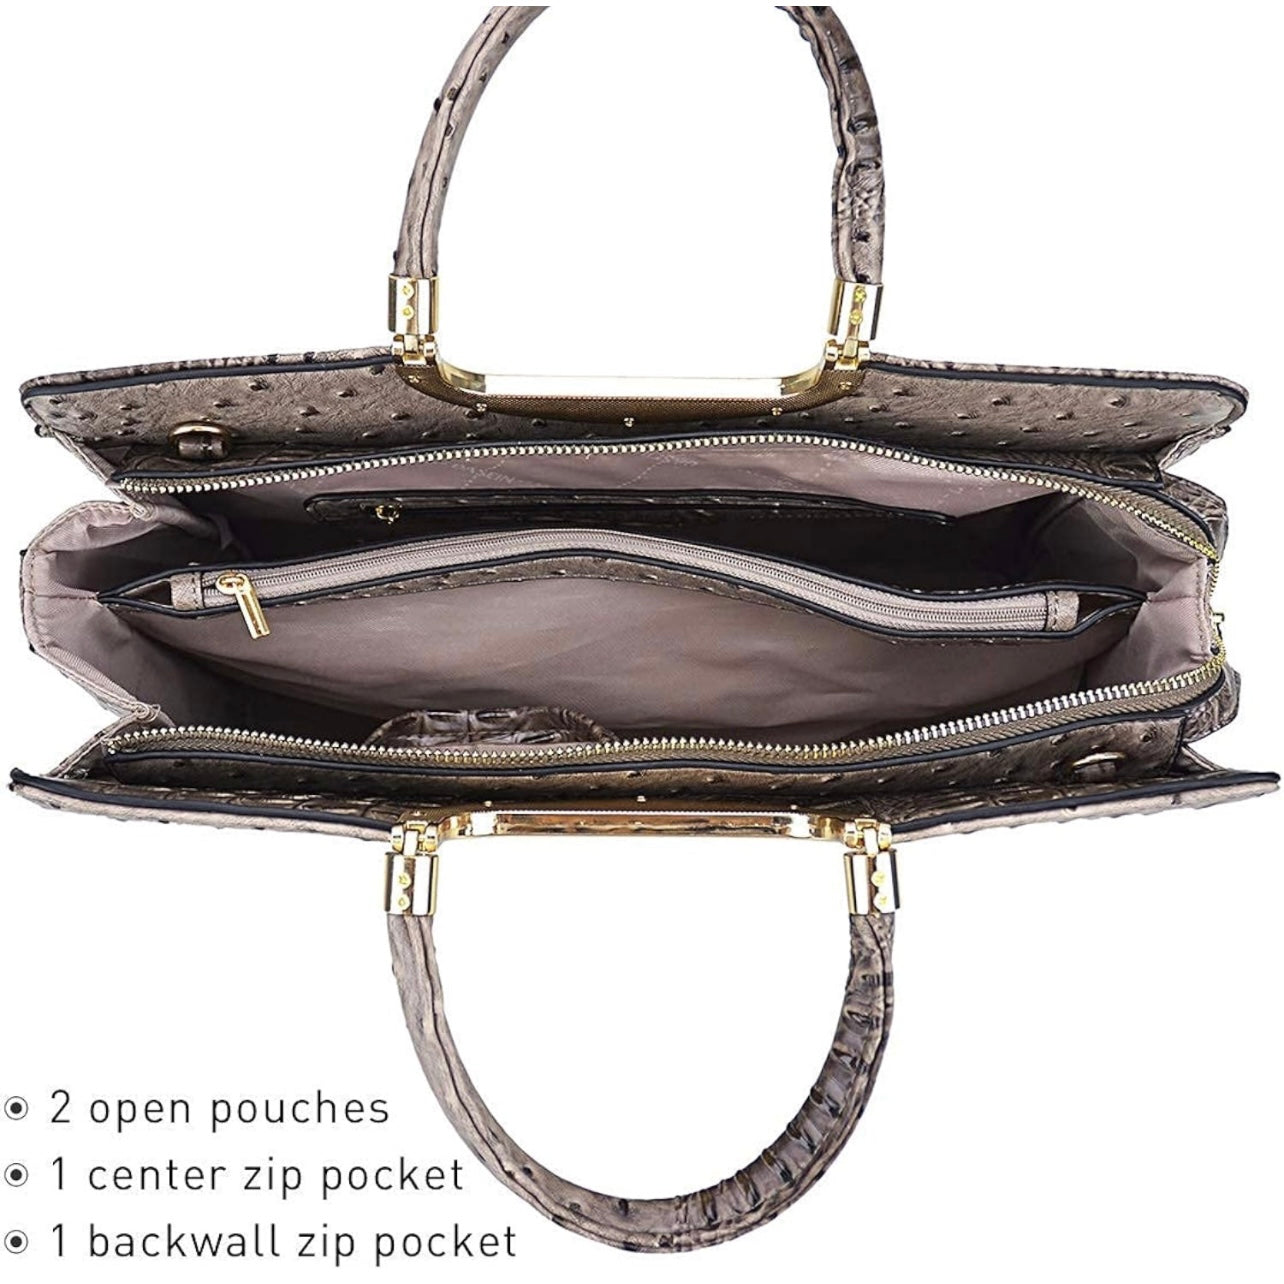 Ostrich vegan leather handbag with a tan and dark brown crocodile embossed feel and design with shiny gold accents, adjustable strap and a matching wallet wristlet for ladies. Only found and available for purchase at Facetreasures Boutique and LadiesNGentz.com